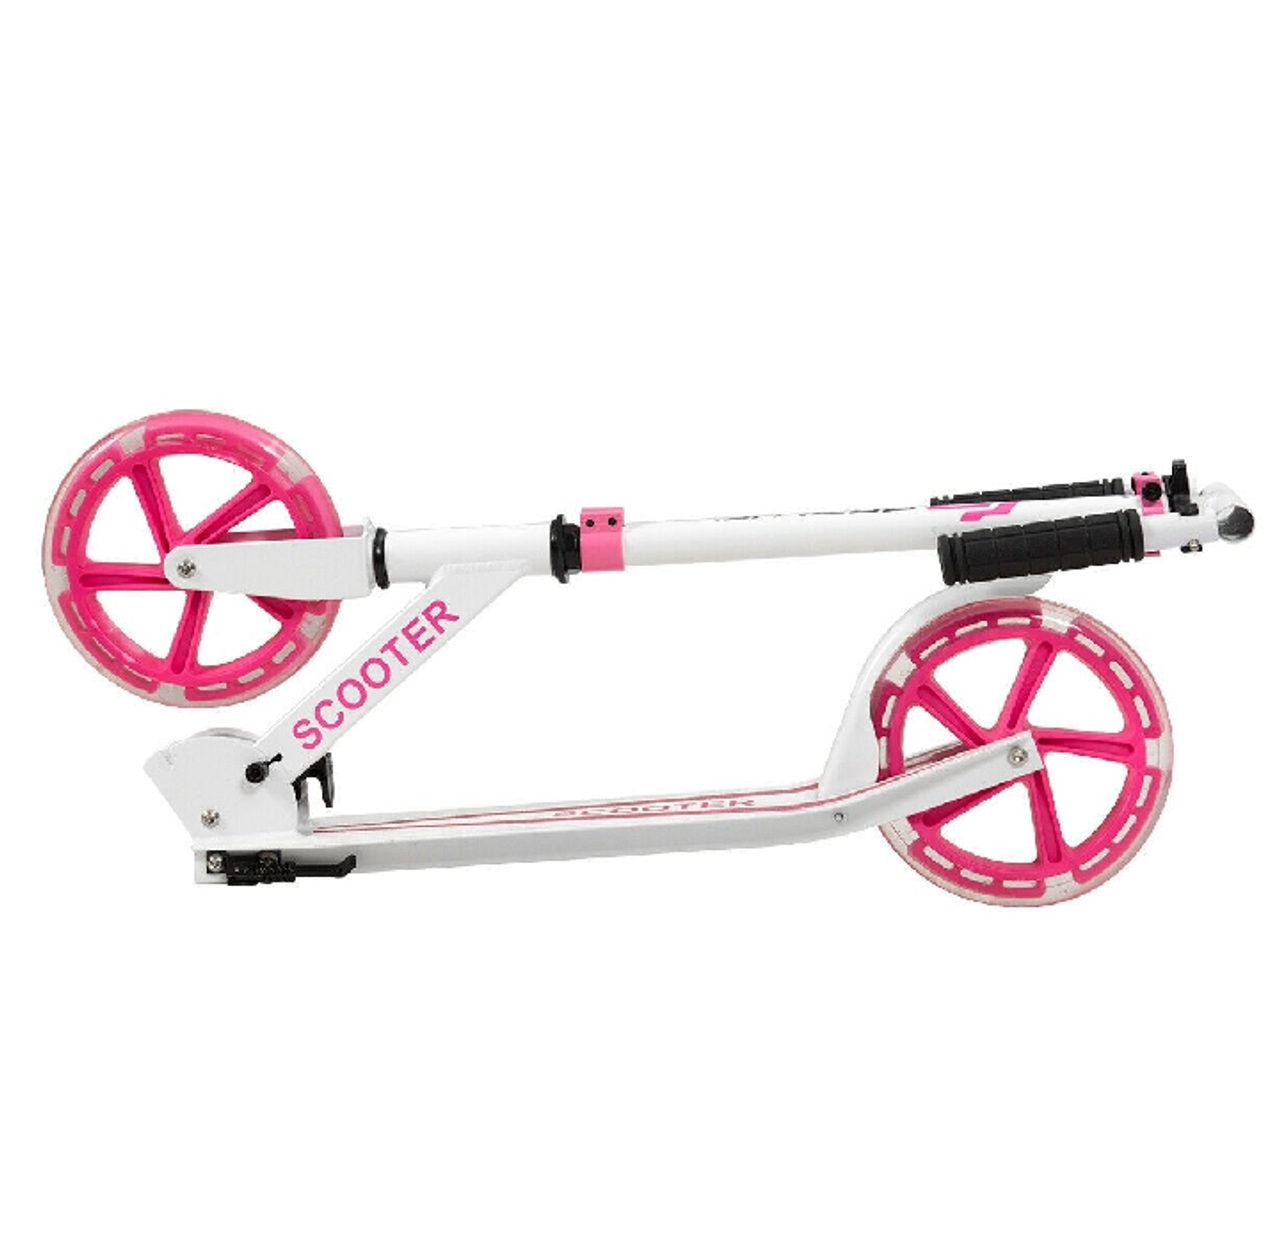 Kids' Folding Kick Scooter with LED Wheels product image